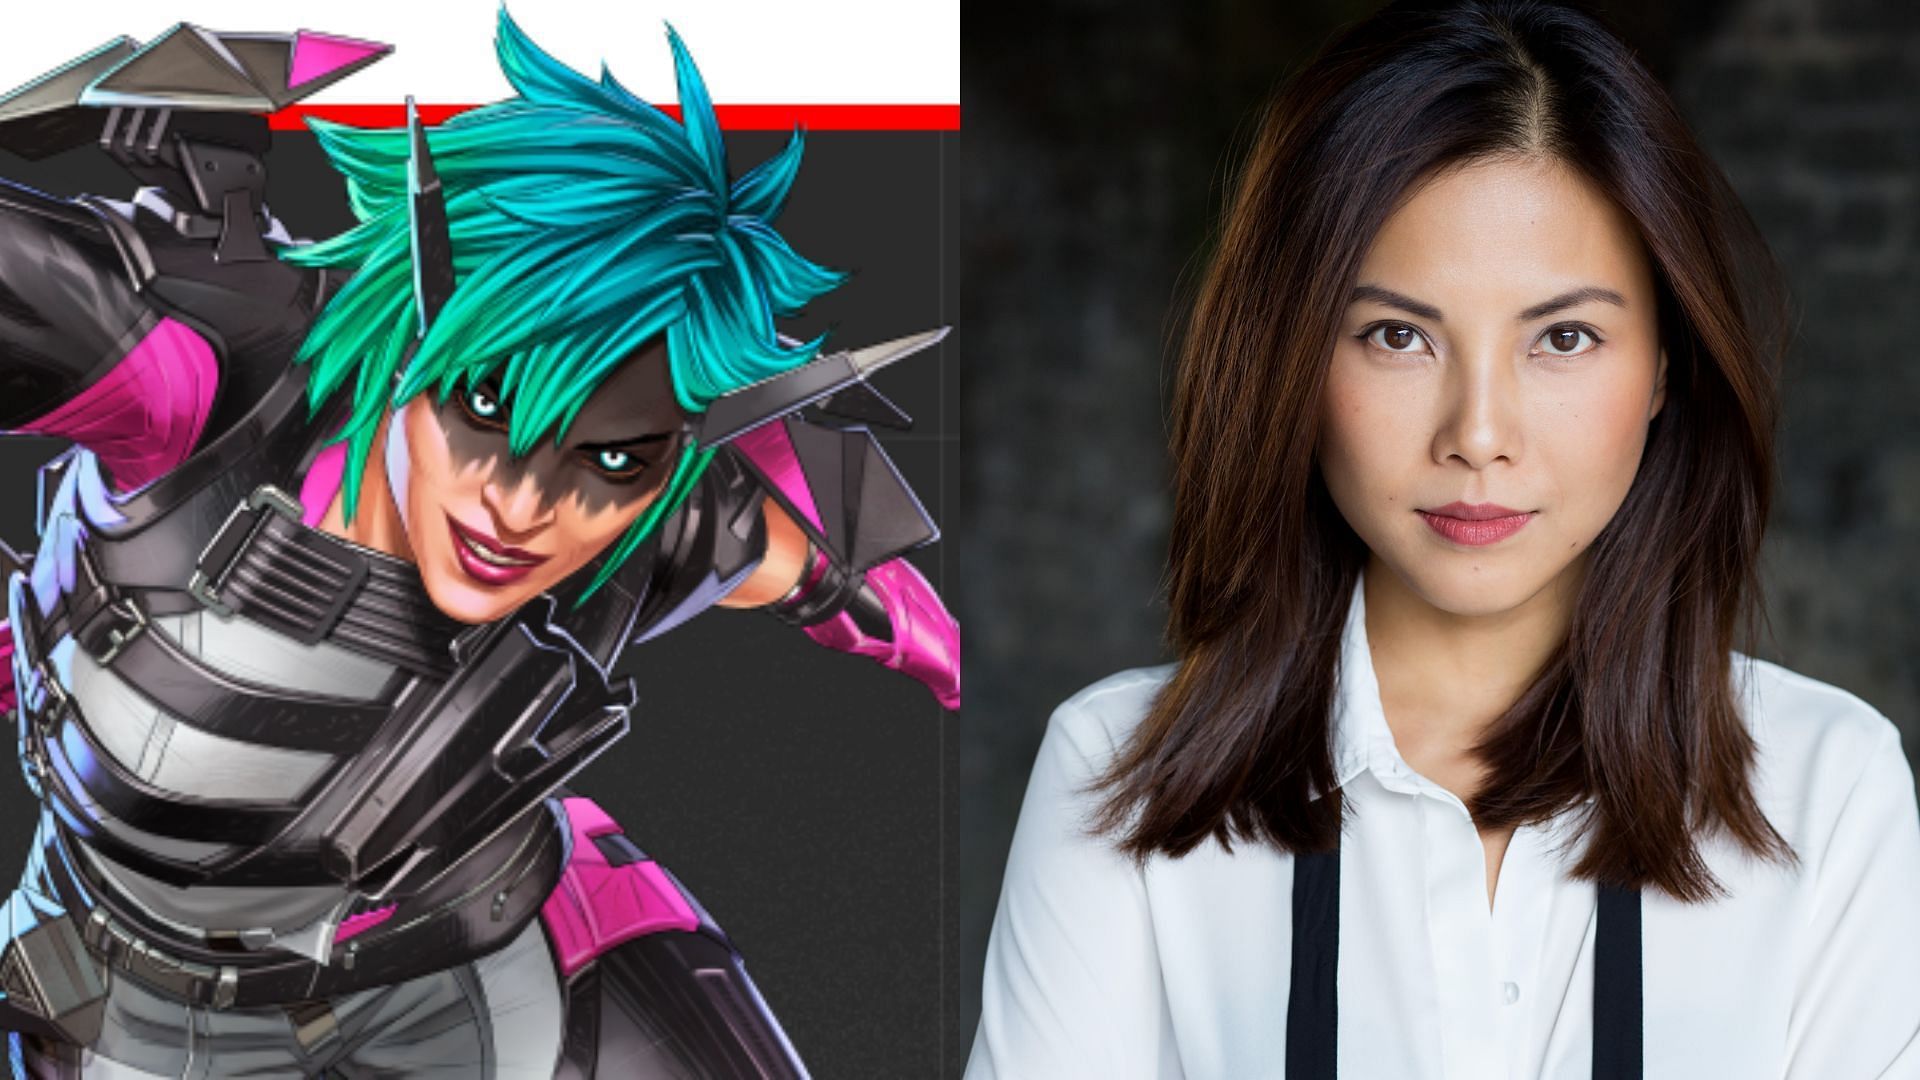 Crystal Yu is the voice actor of Alter in Apex legends (Image via EA/IMDb)